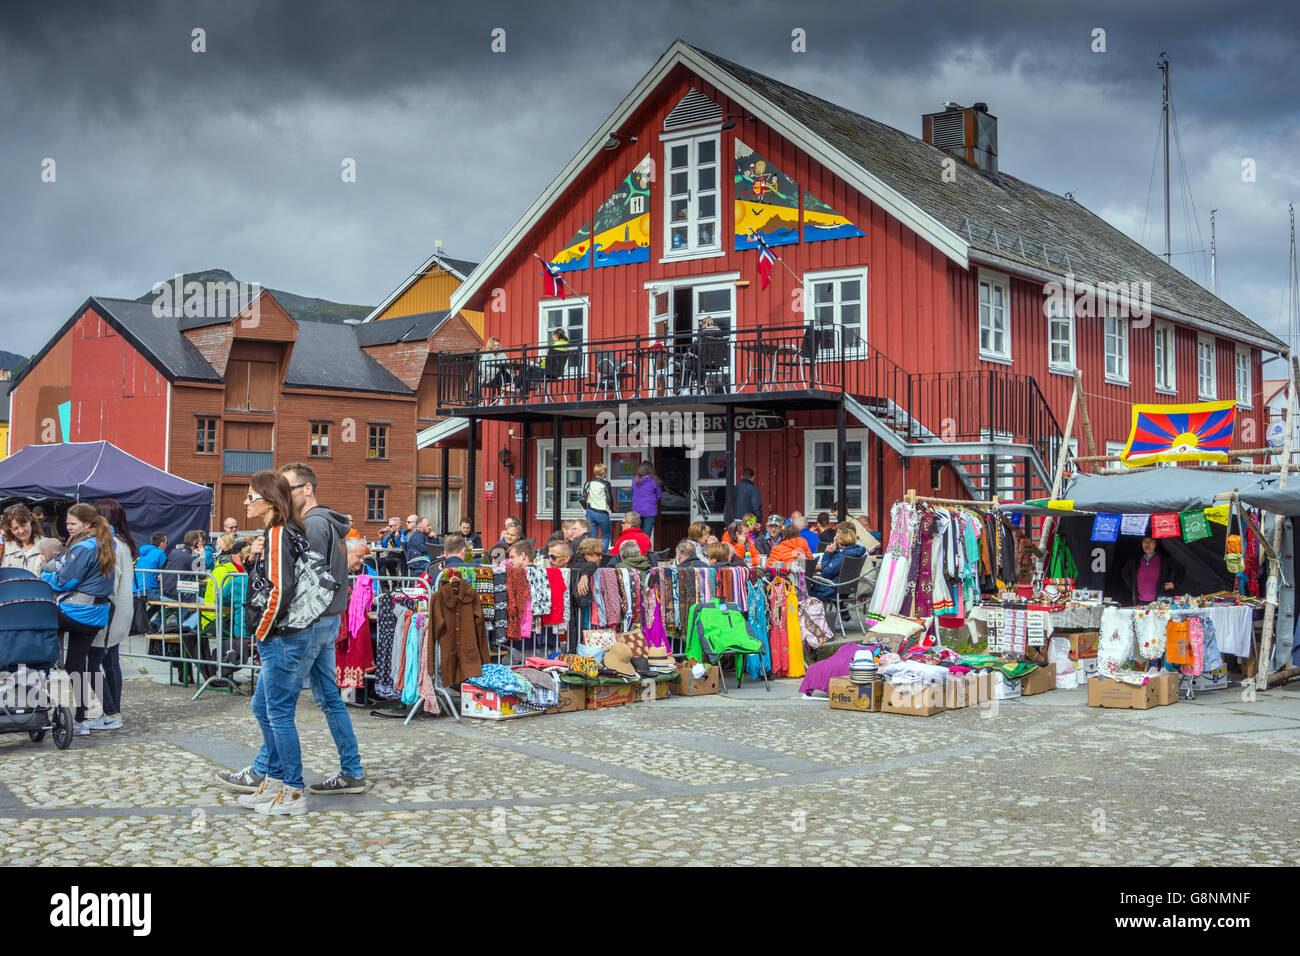 Outdoor festival,with people, stalls and red buildings Kabelvag, Stock Photo